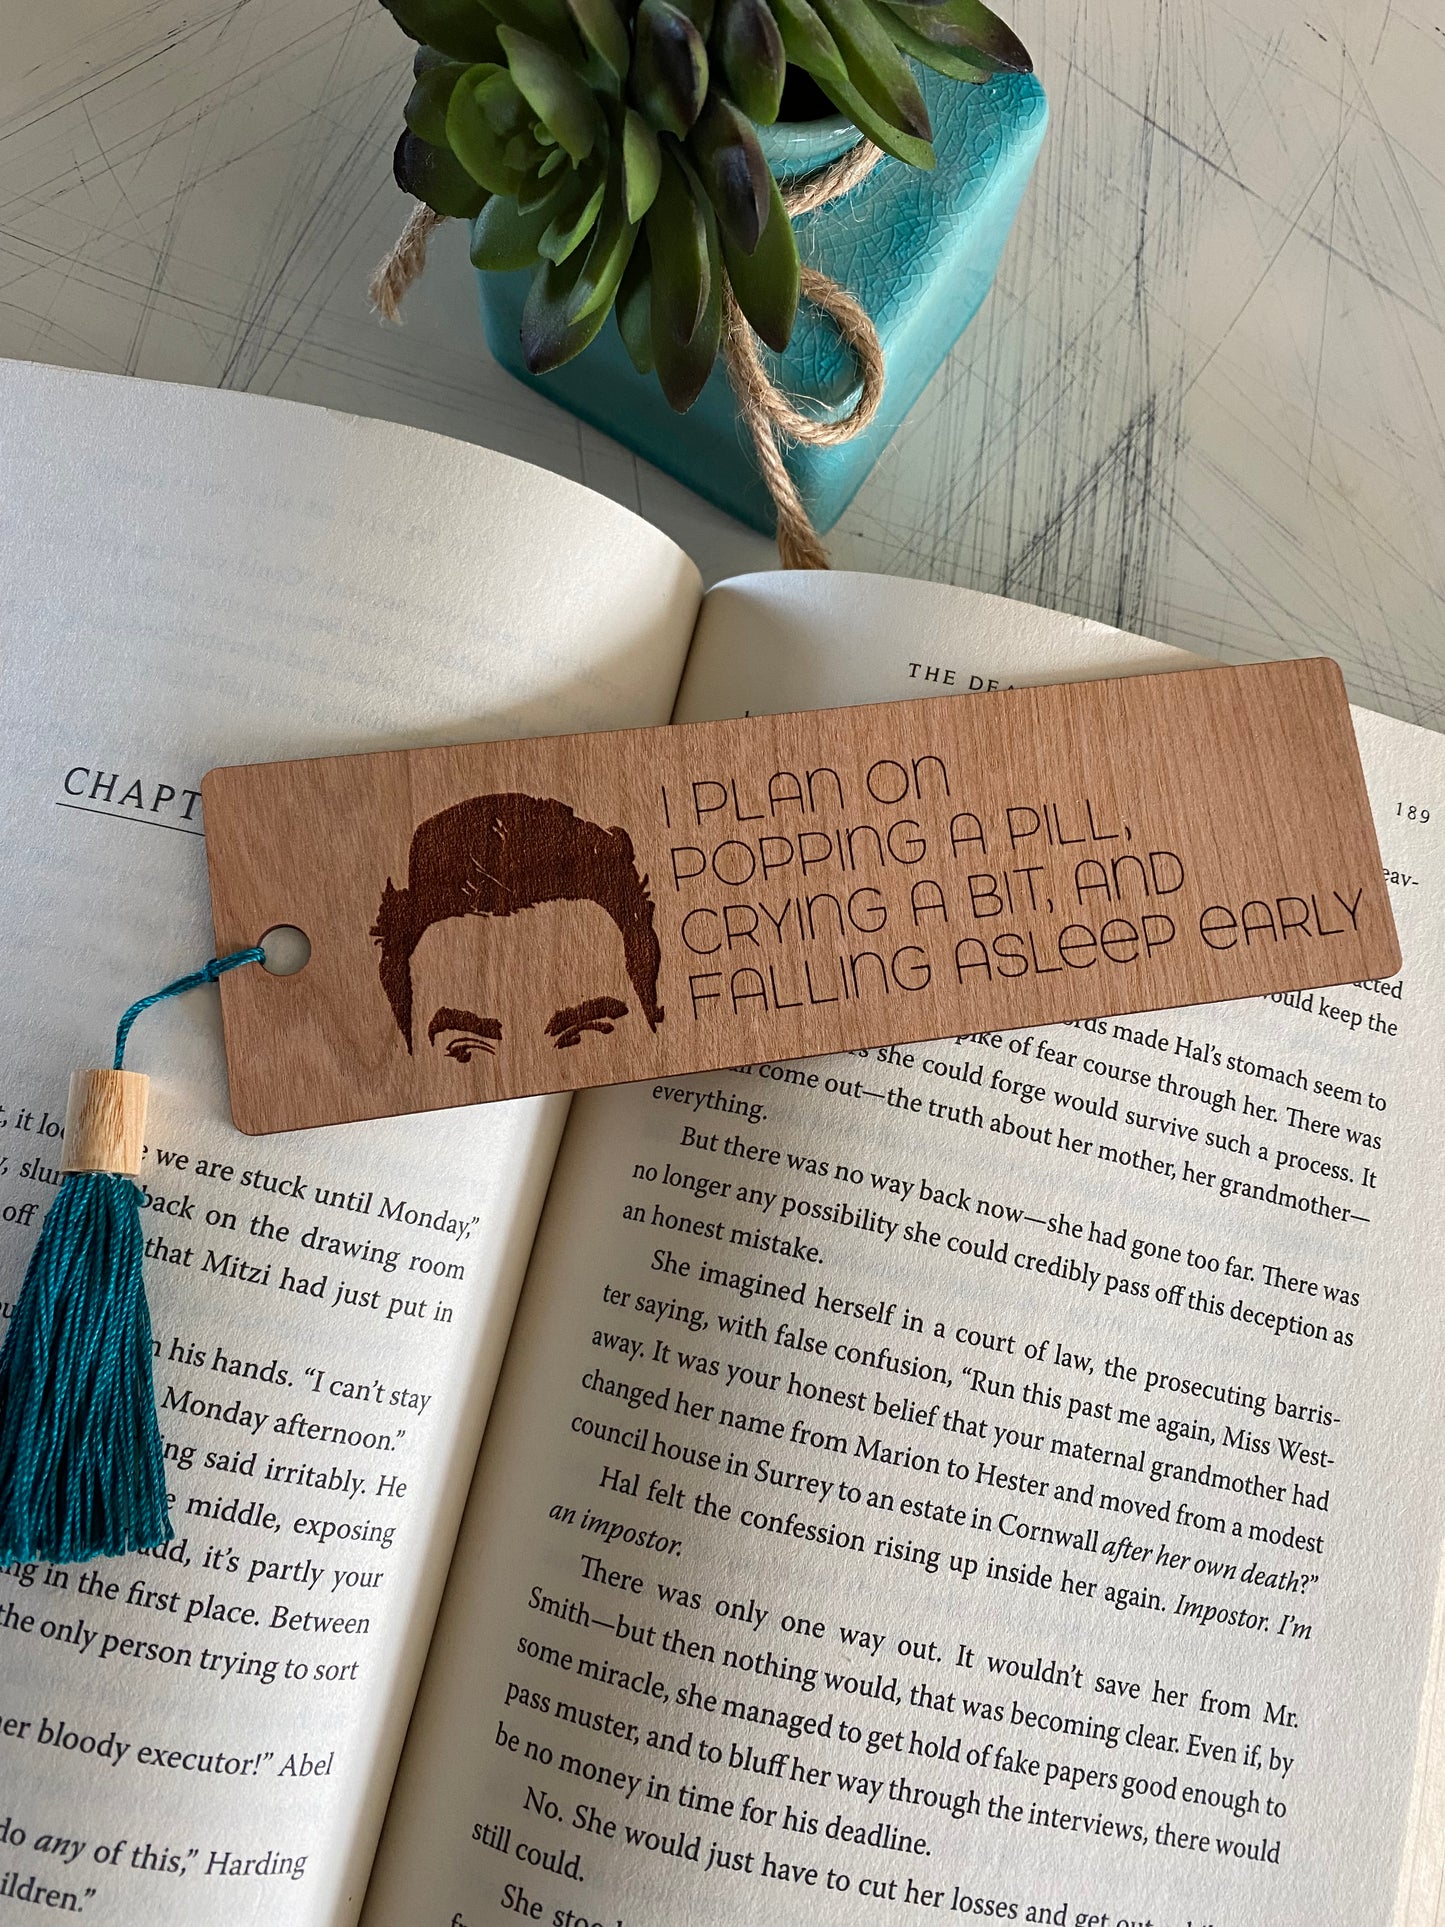 I plan on popping a pill, crying a bit, and falling asleep early. - engraved wood bookmark